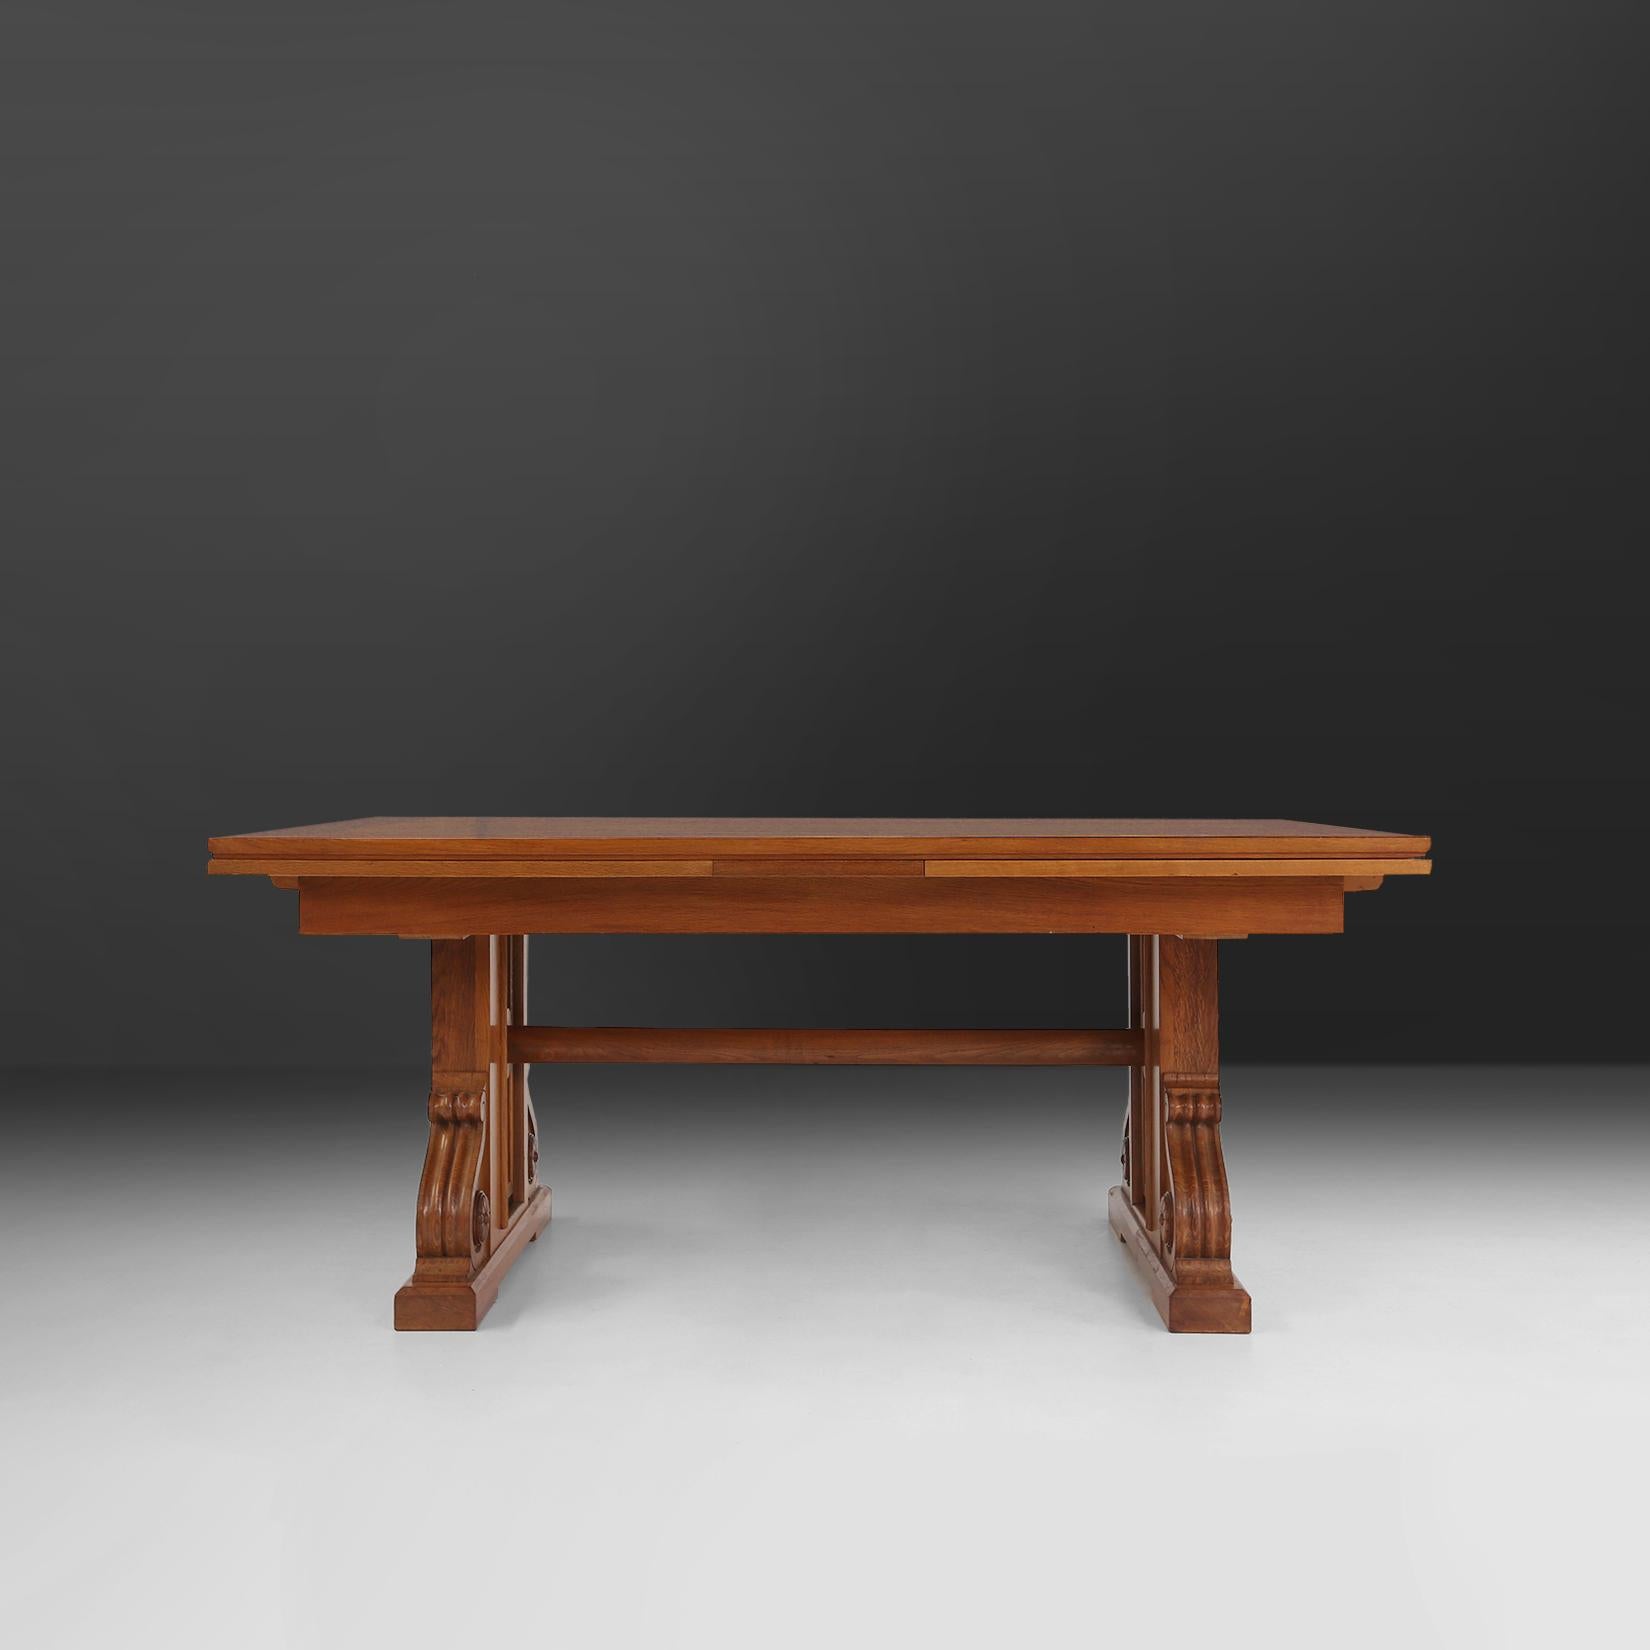 Belgian Art Deco dining table madeof solid oak wood.
Beautiful designed table with representing the Art Deco period of the 1940s. With a base consisting of large monumental legs with beautifully sculpted details. The two extendable leaves makes